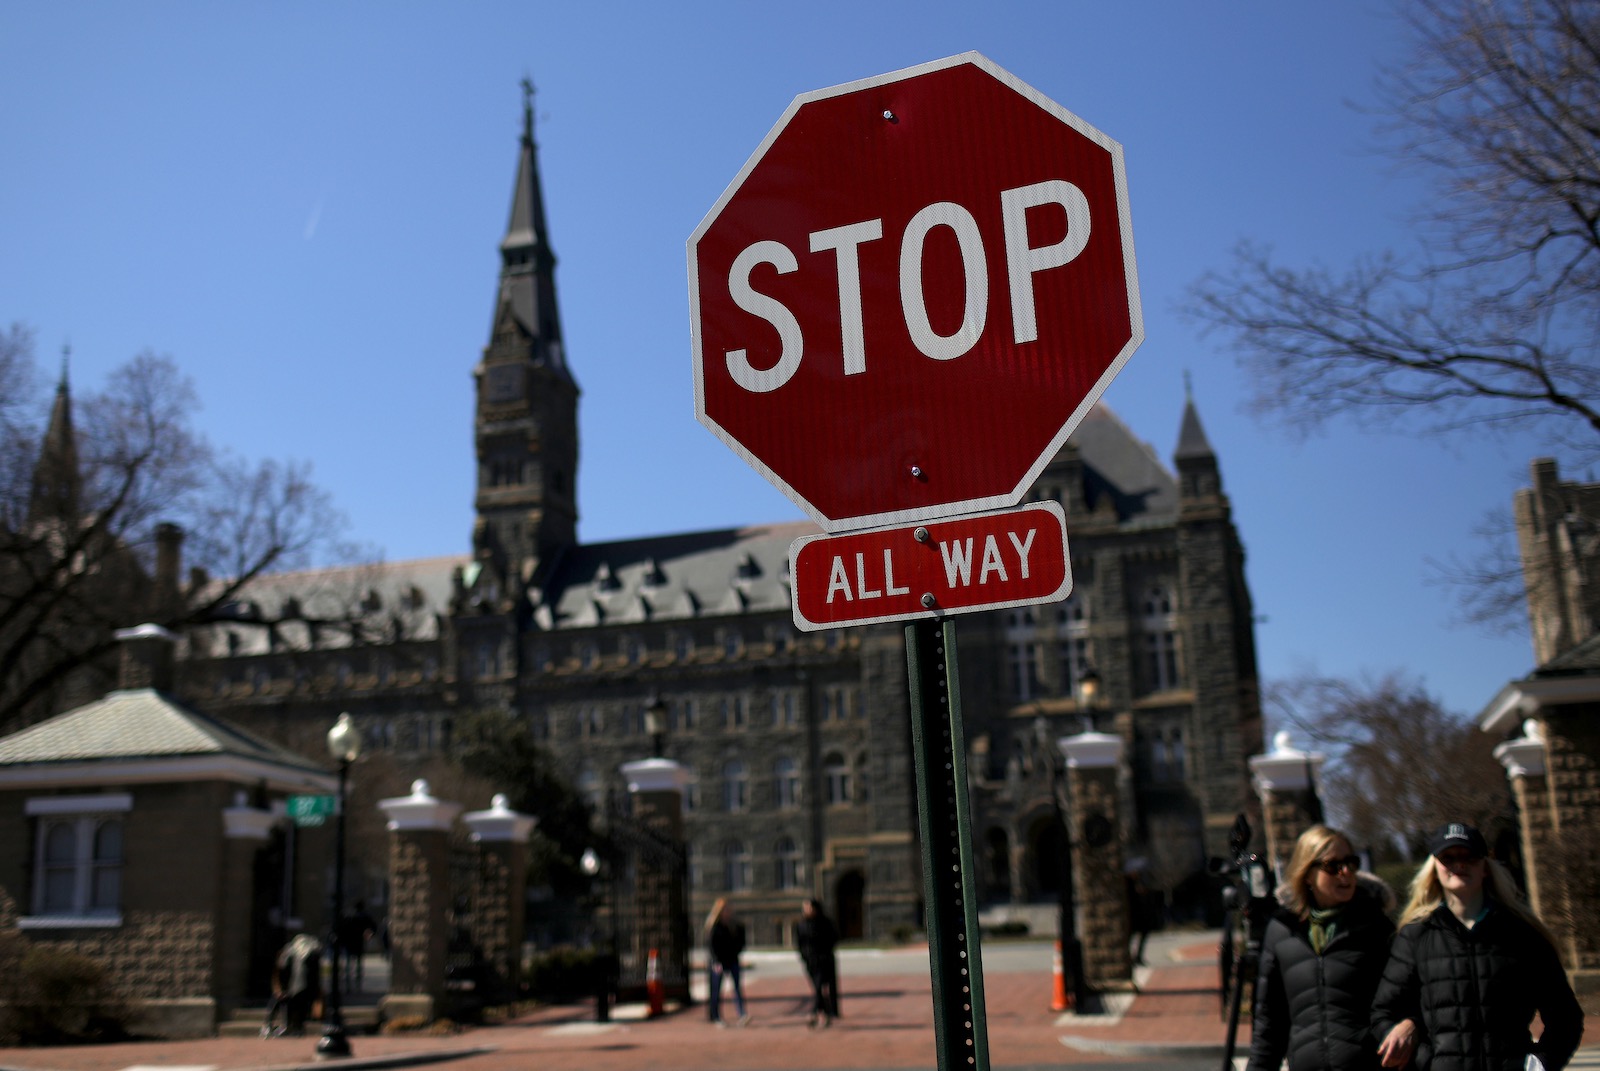 The campus of Georgetown University